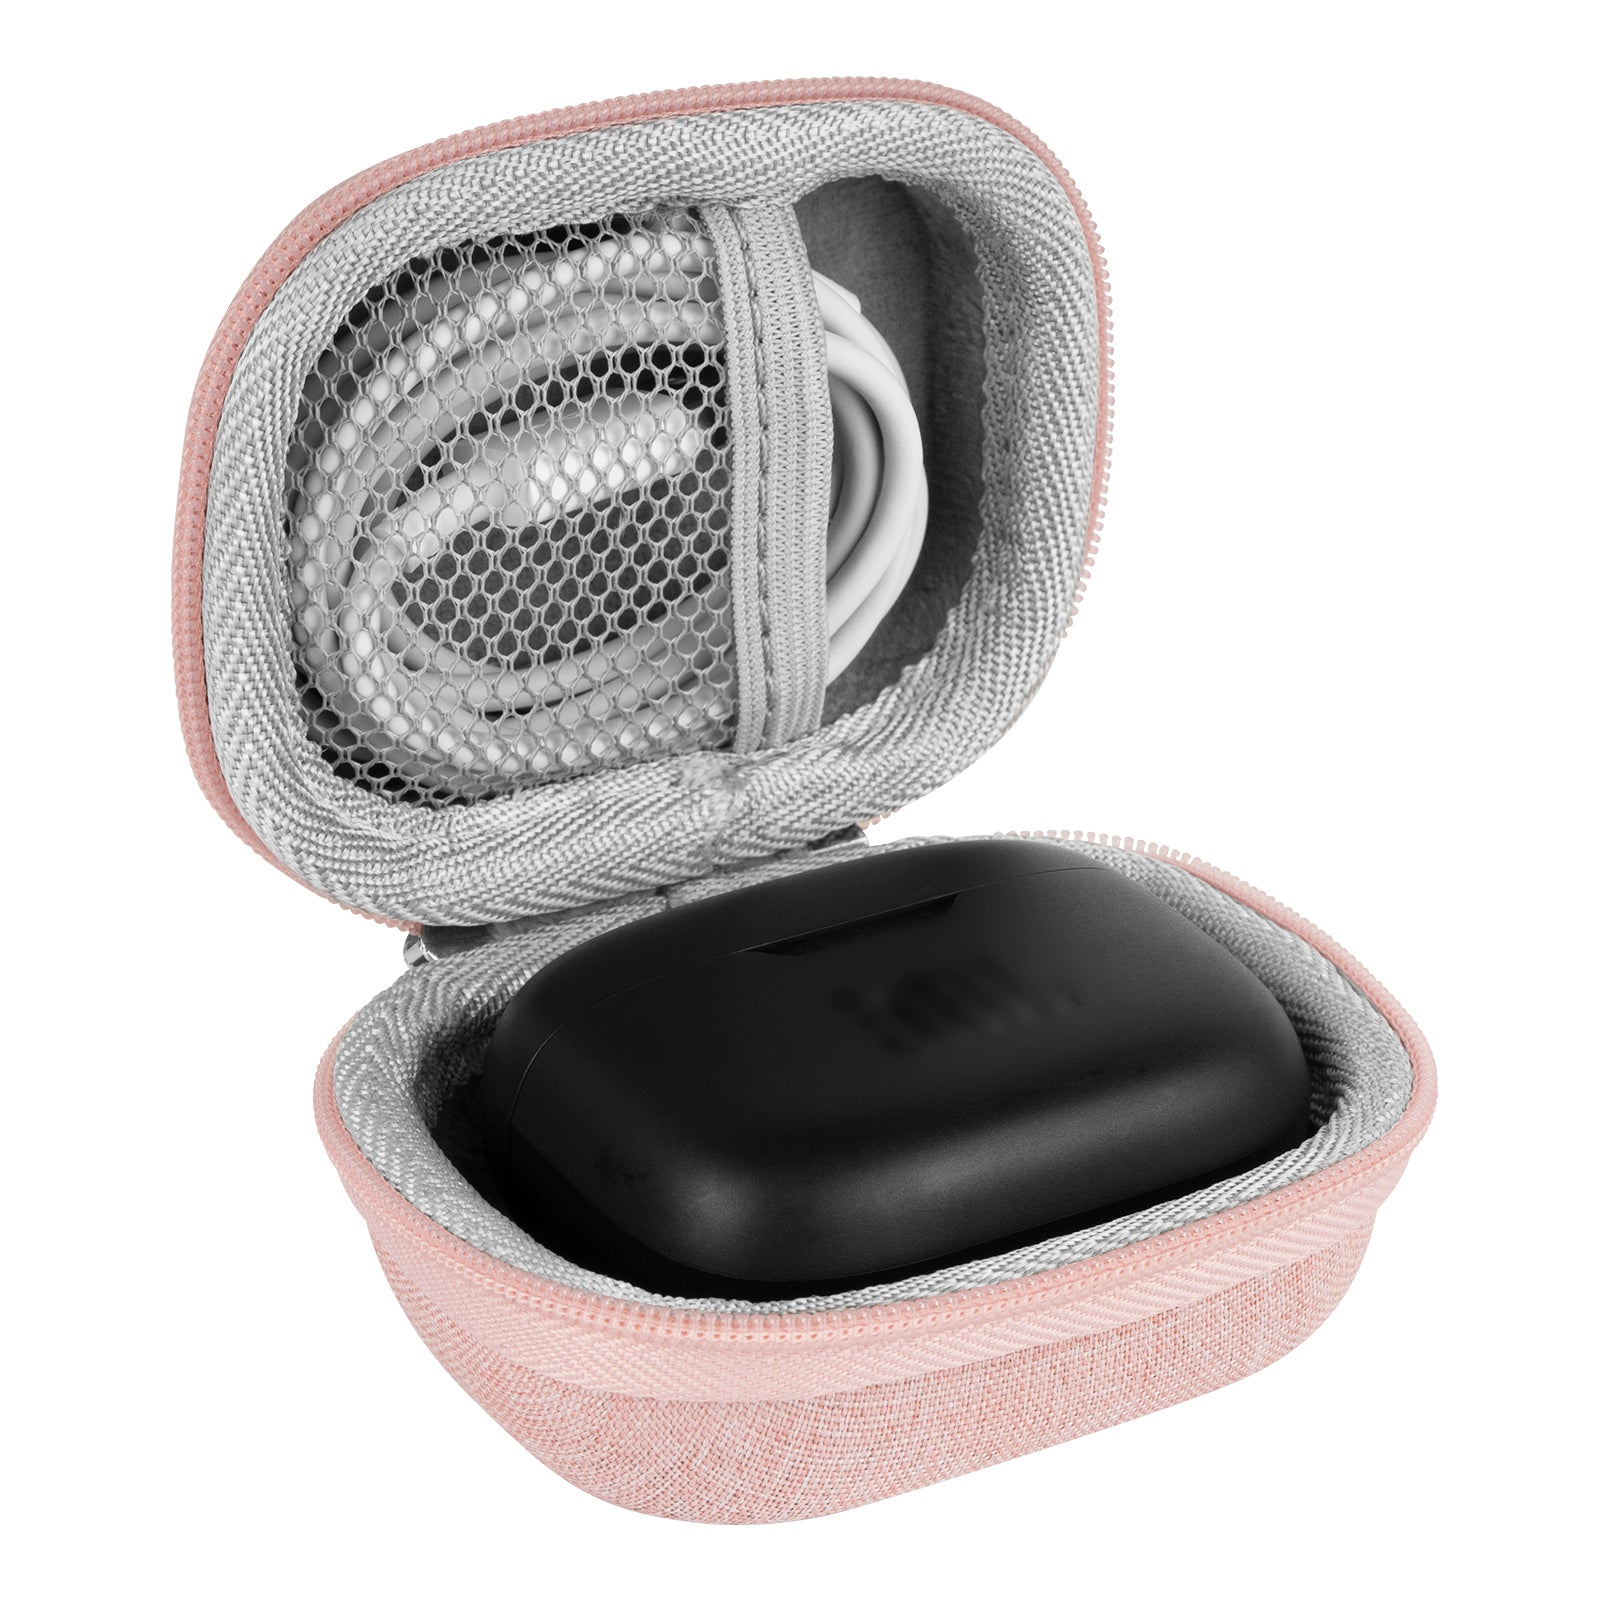 Whoamigo for JBL Tune Beam Headset Sleeve - Shockproof Carrying Case 